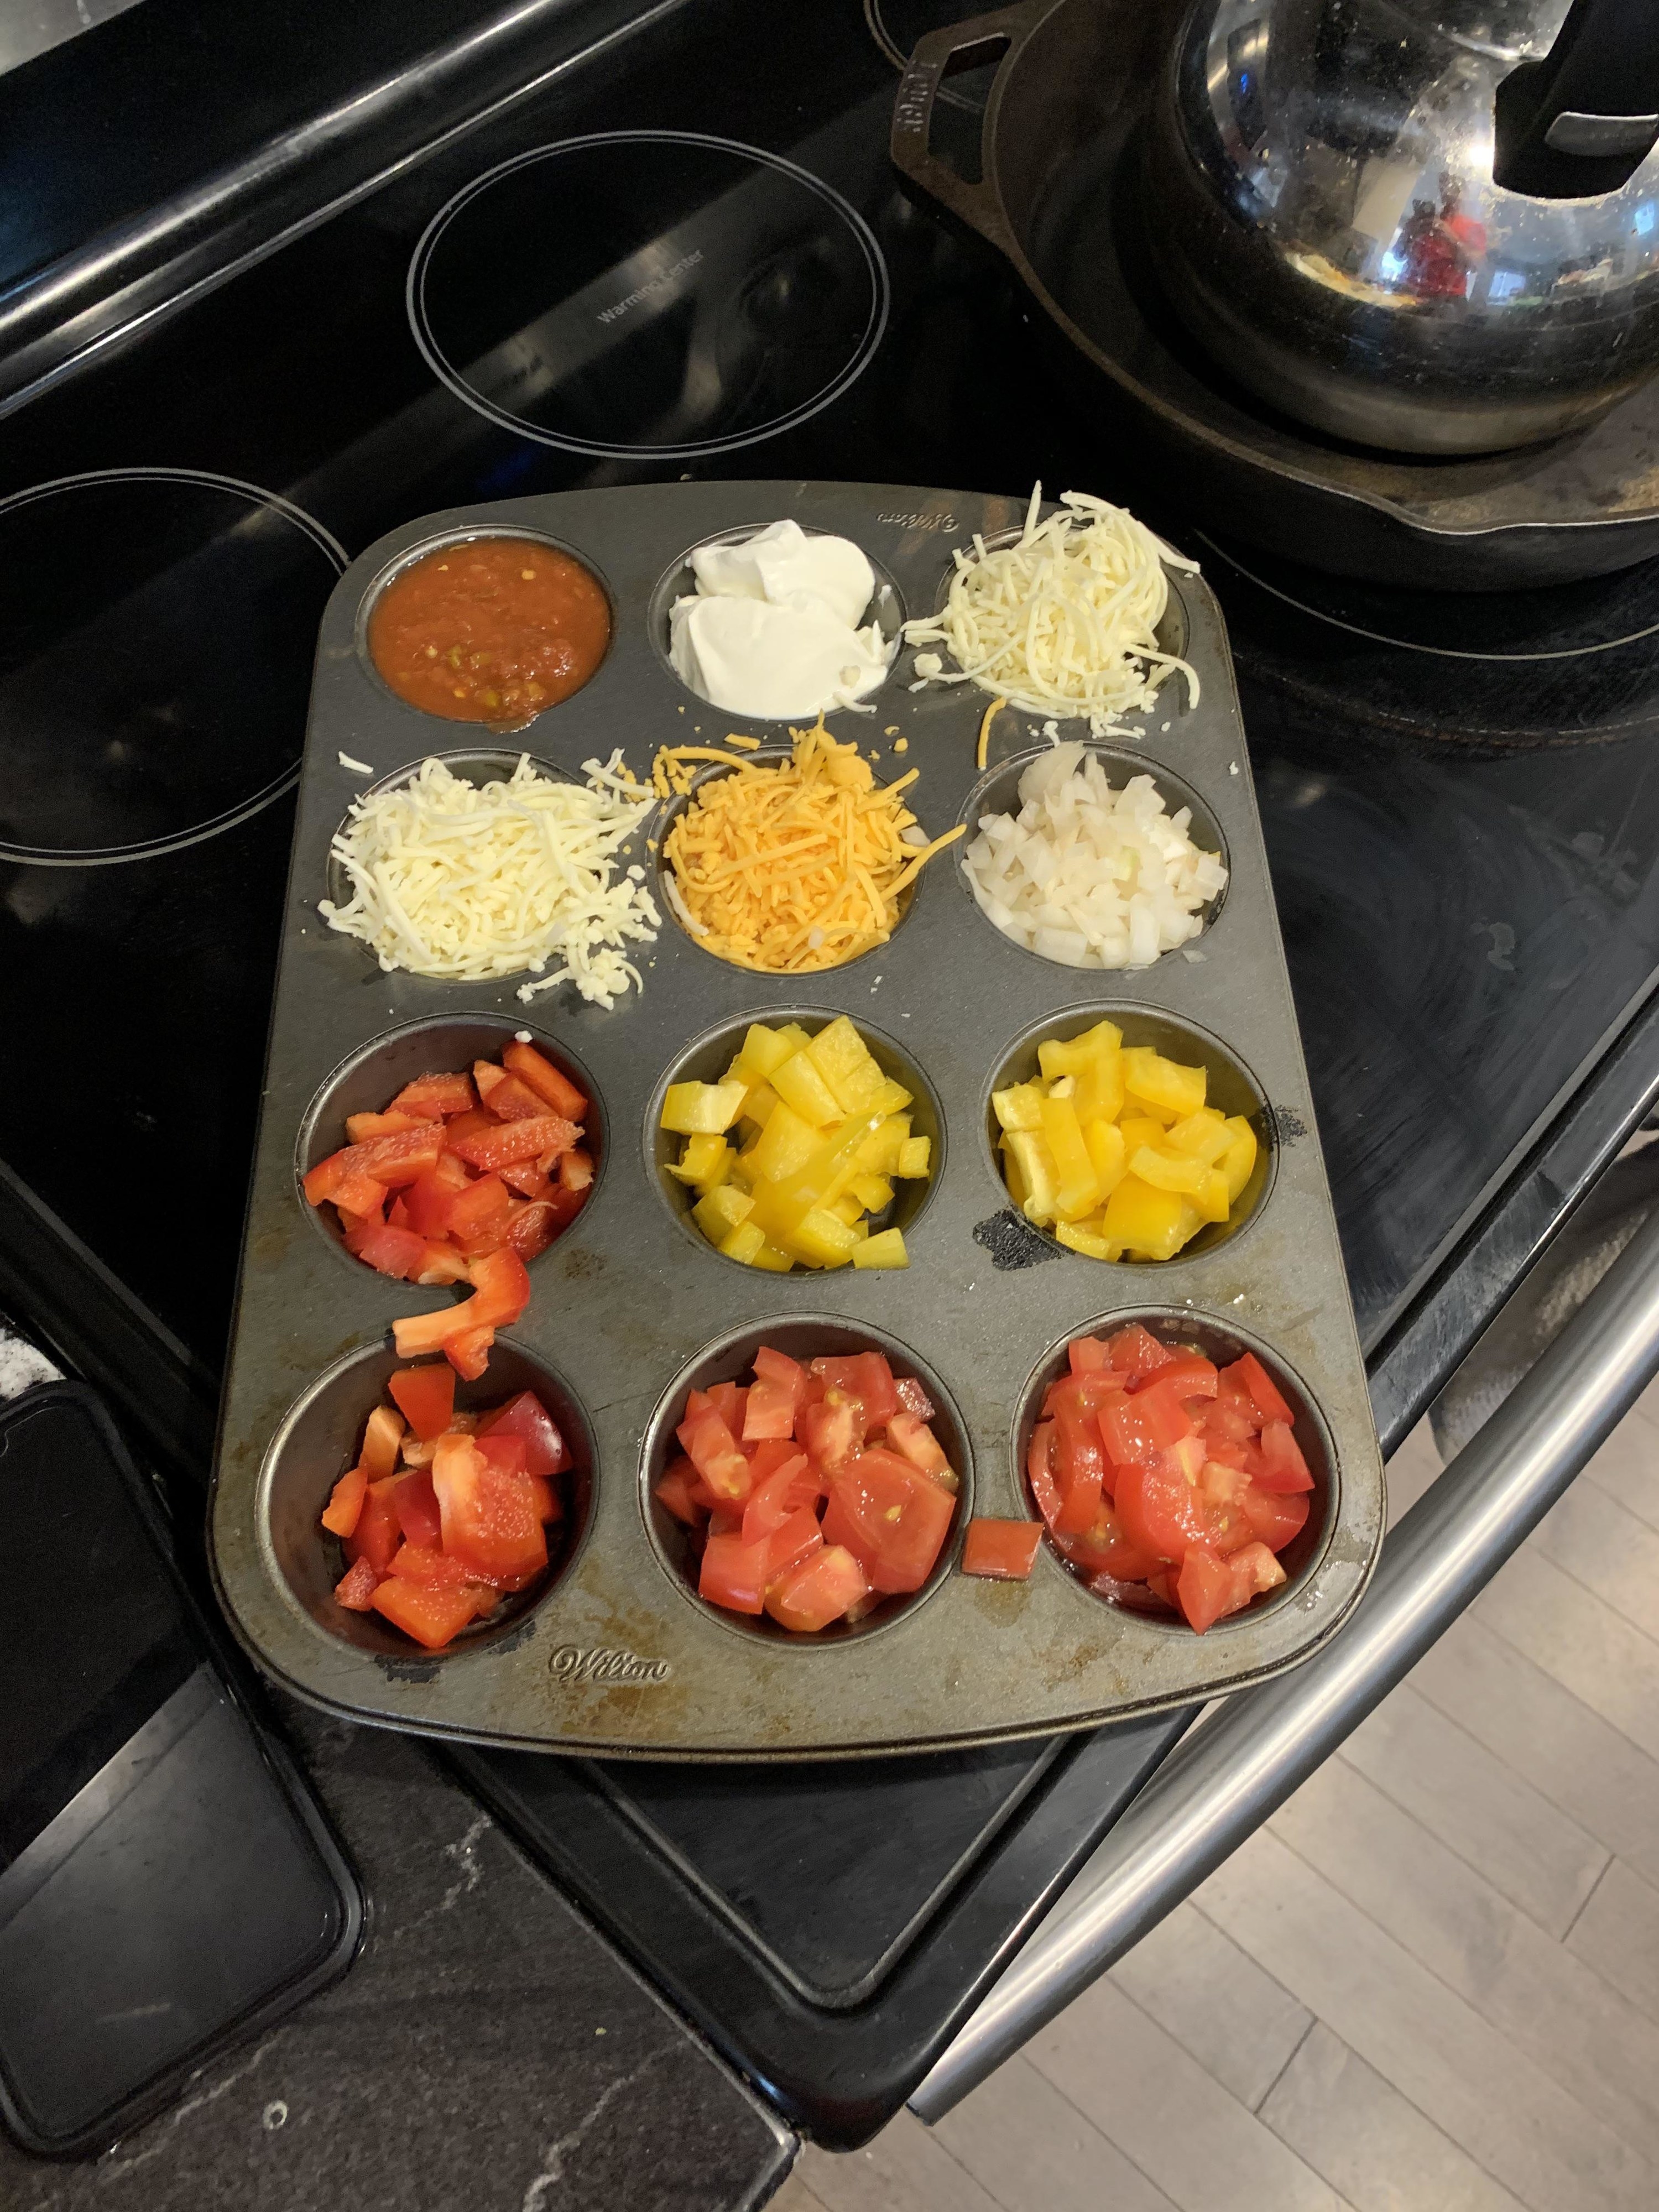 A muffin tin being used to store taco toppings